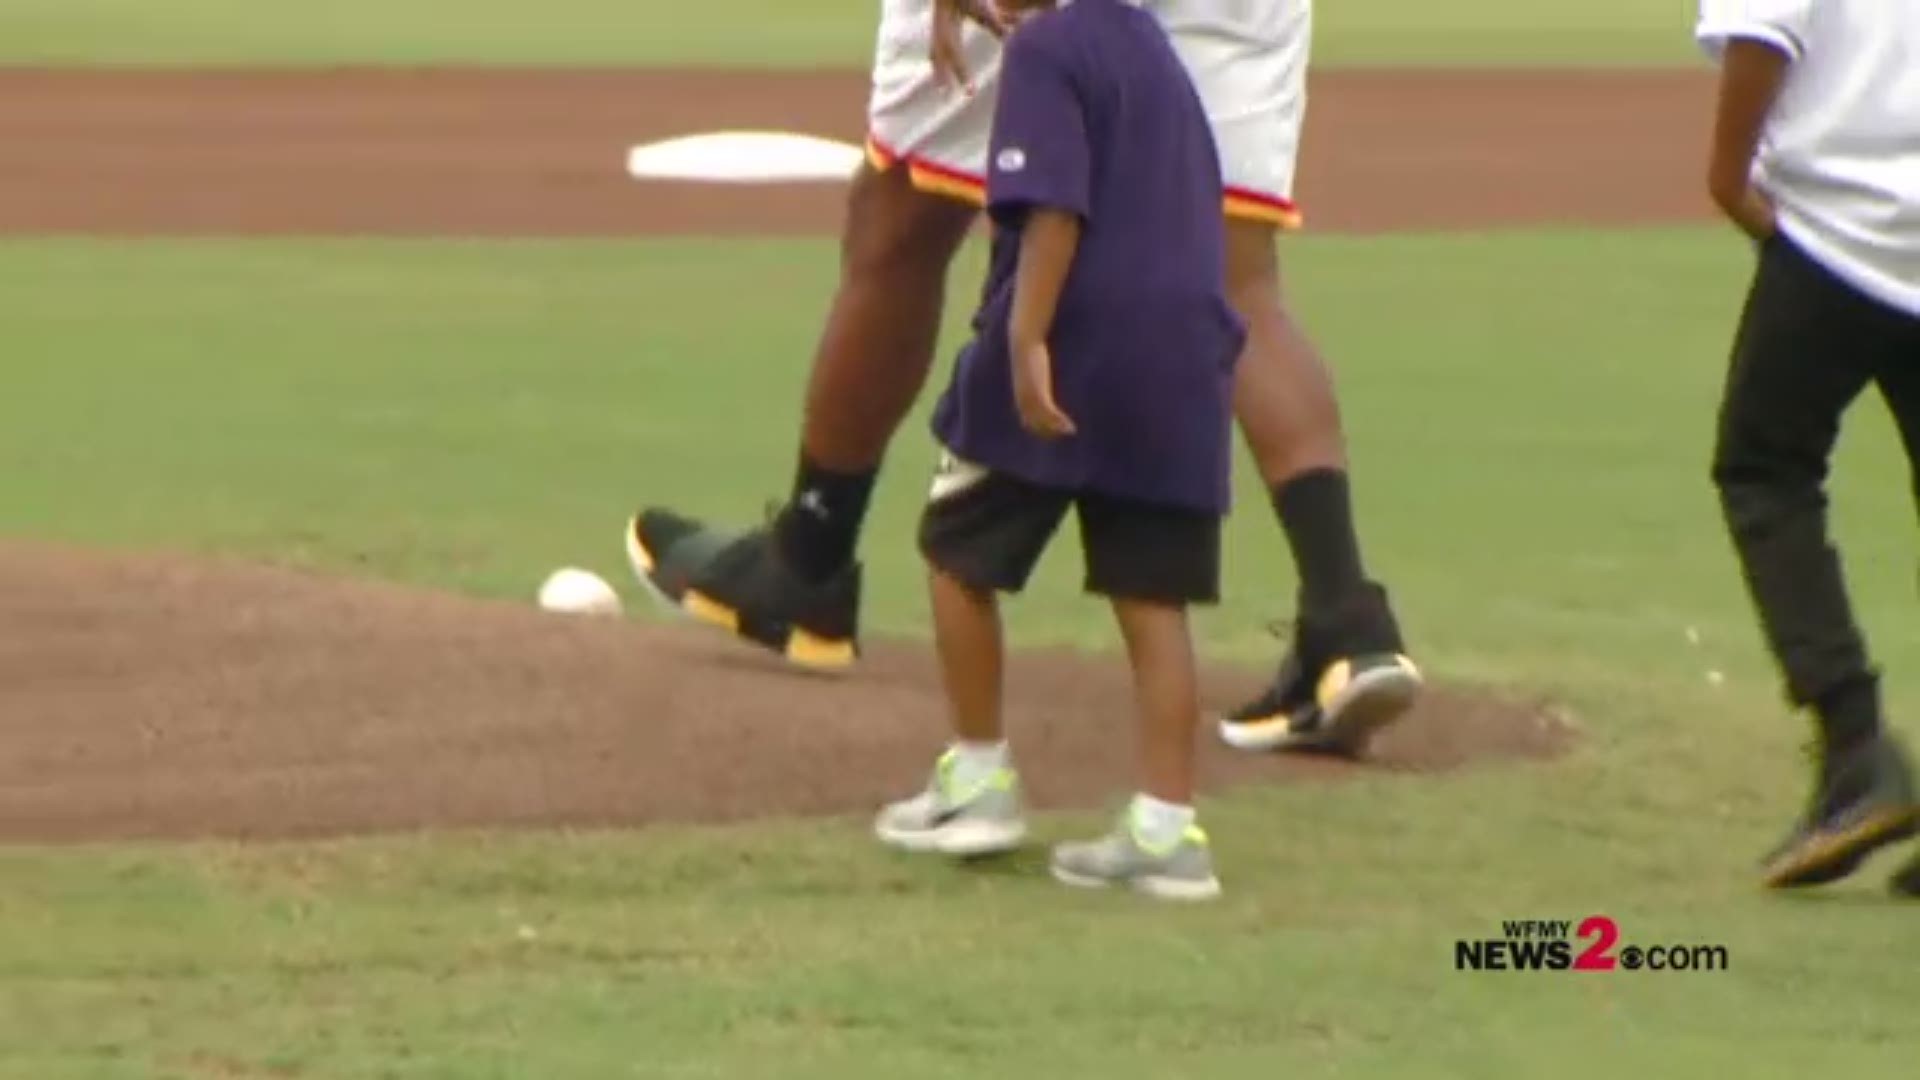 NBA Star Chris Paul throws out first pitch at Dash game.